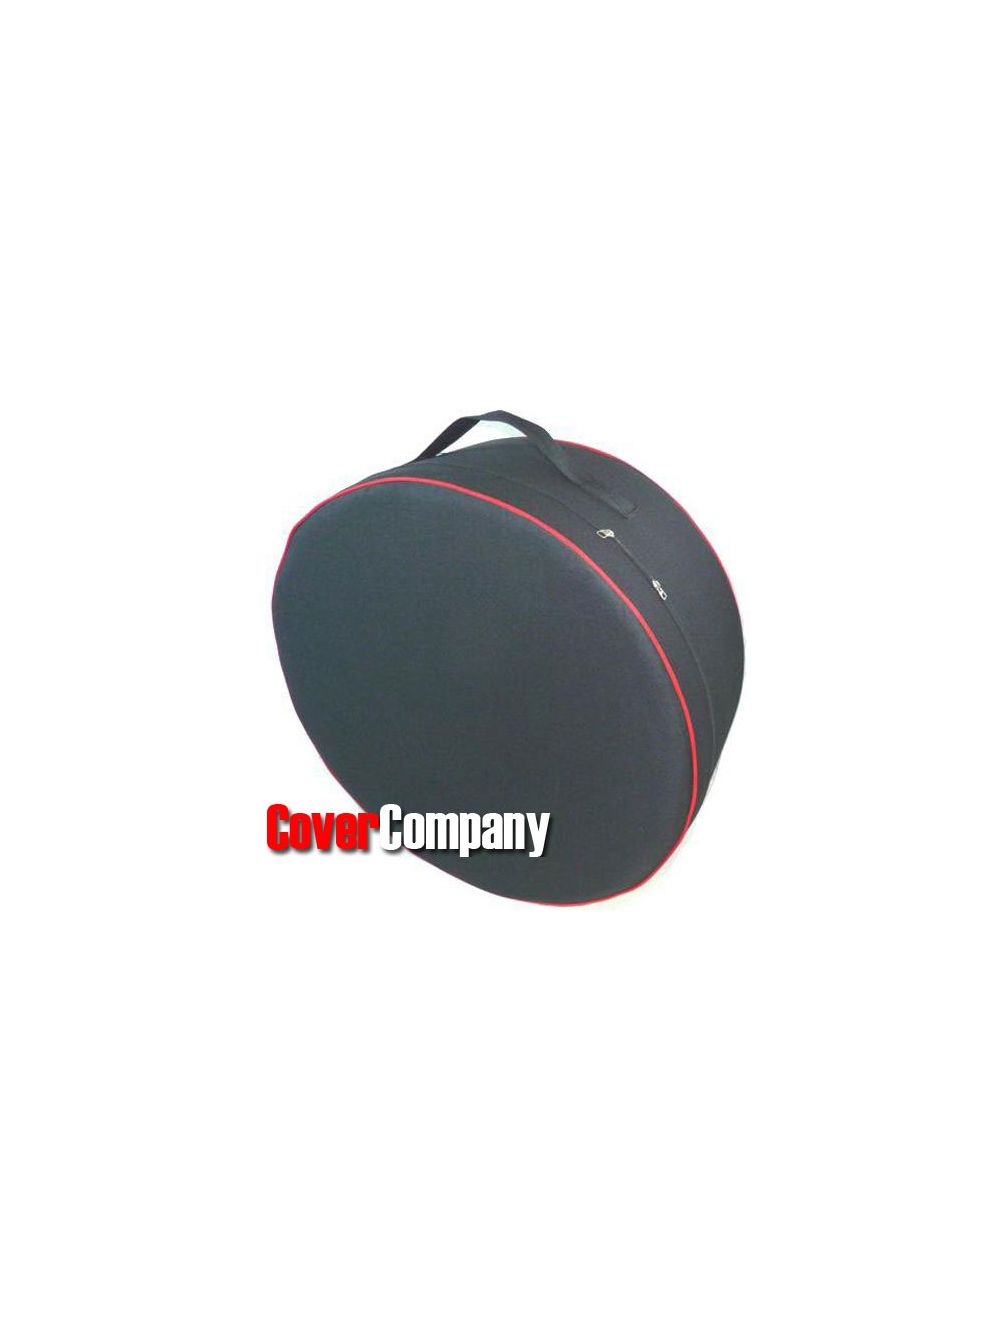 Housse Rangement Protection Roue Voiture - Cover Company France